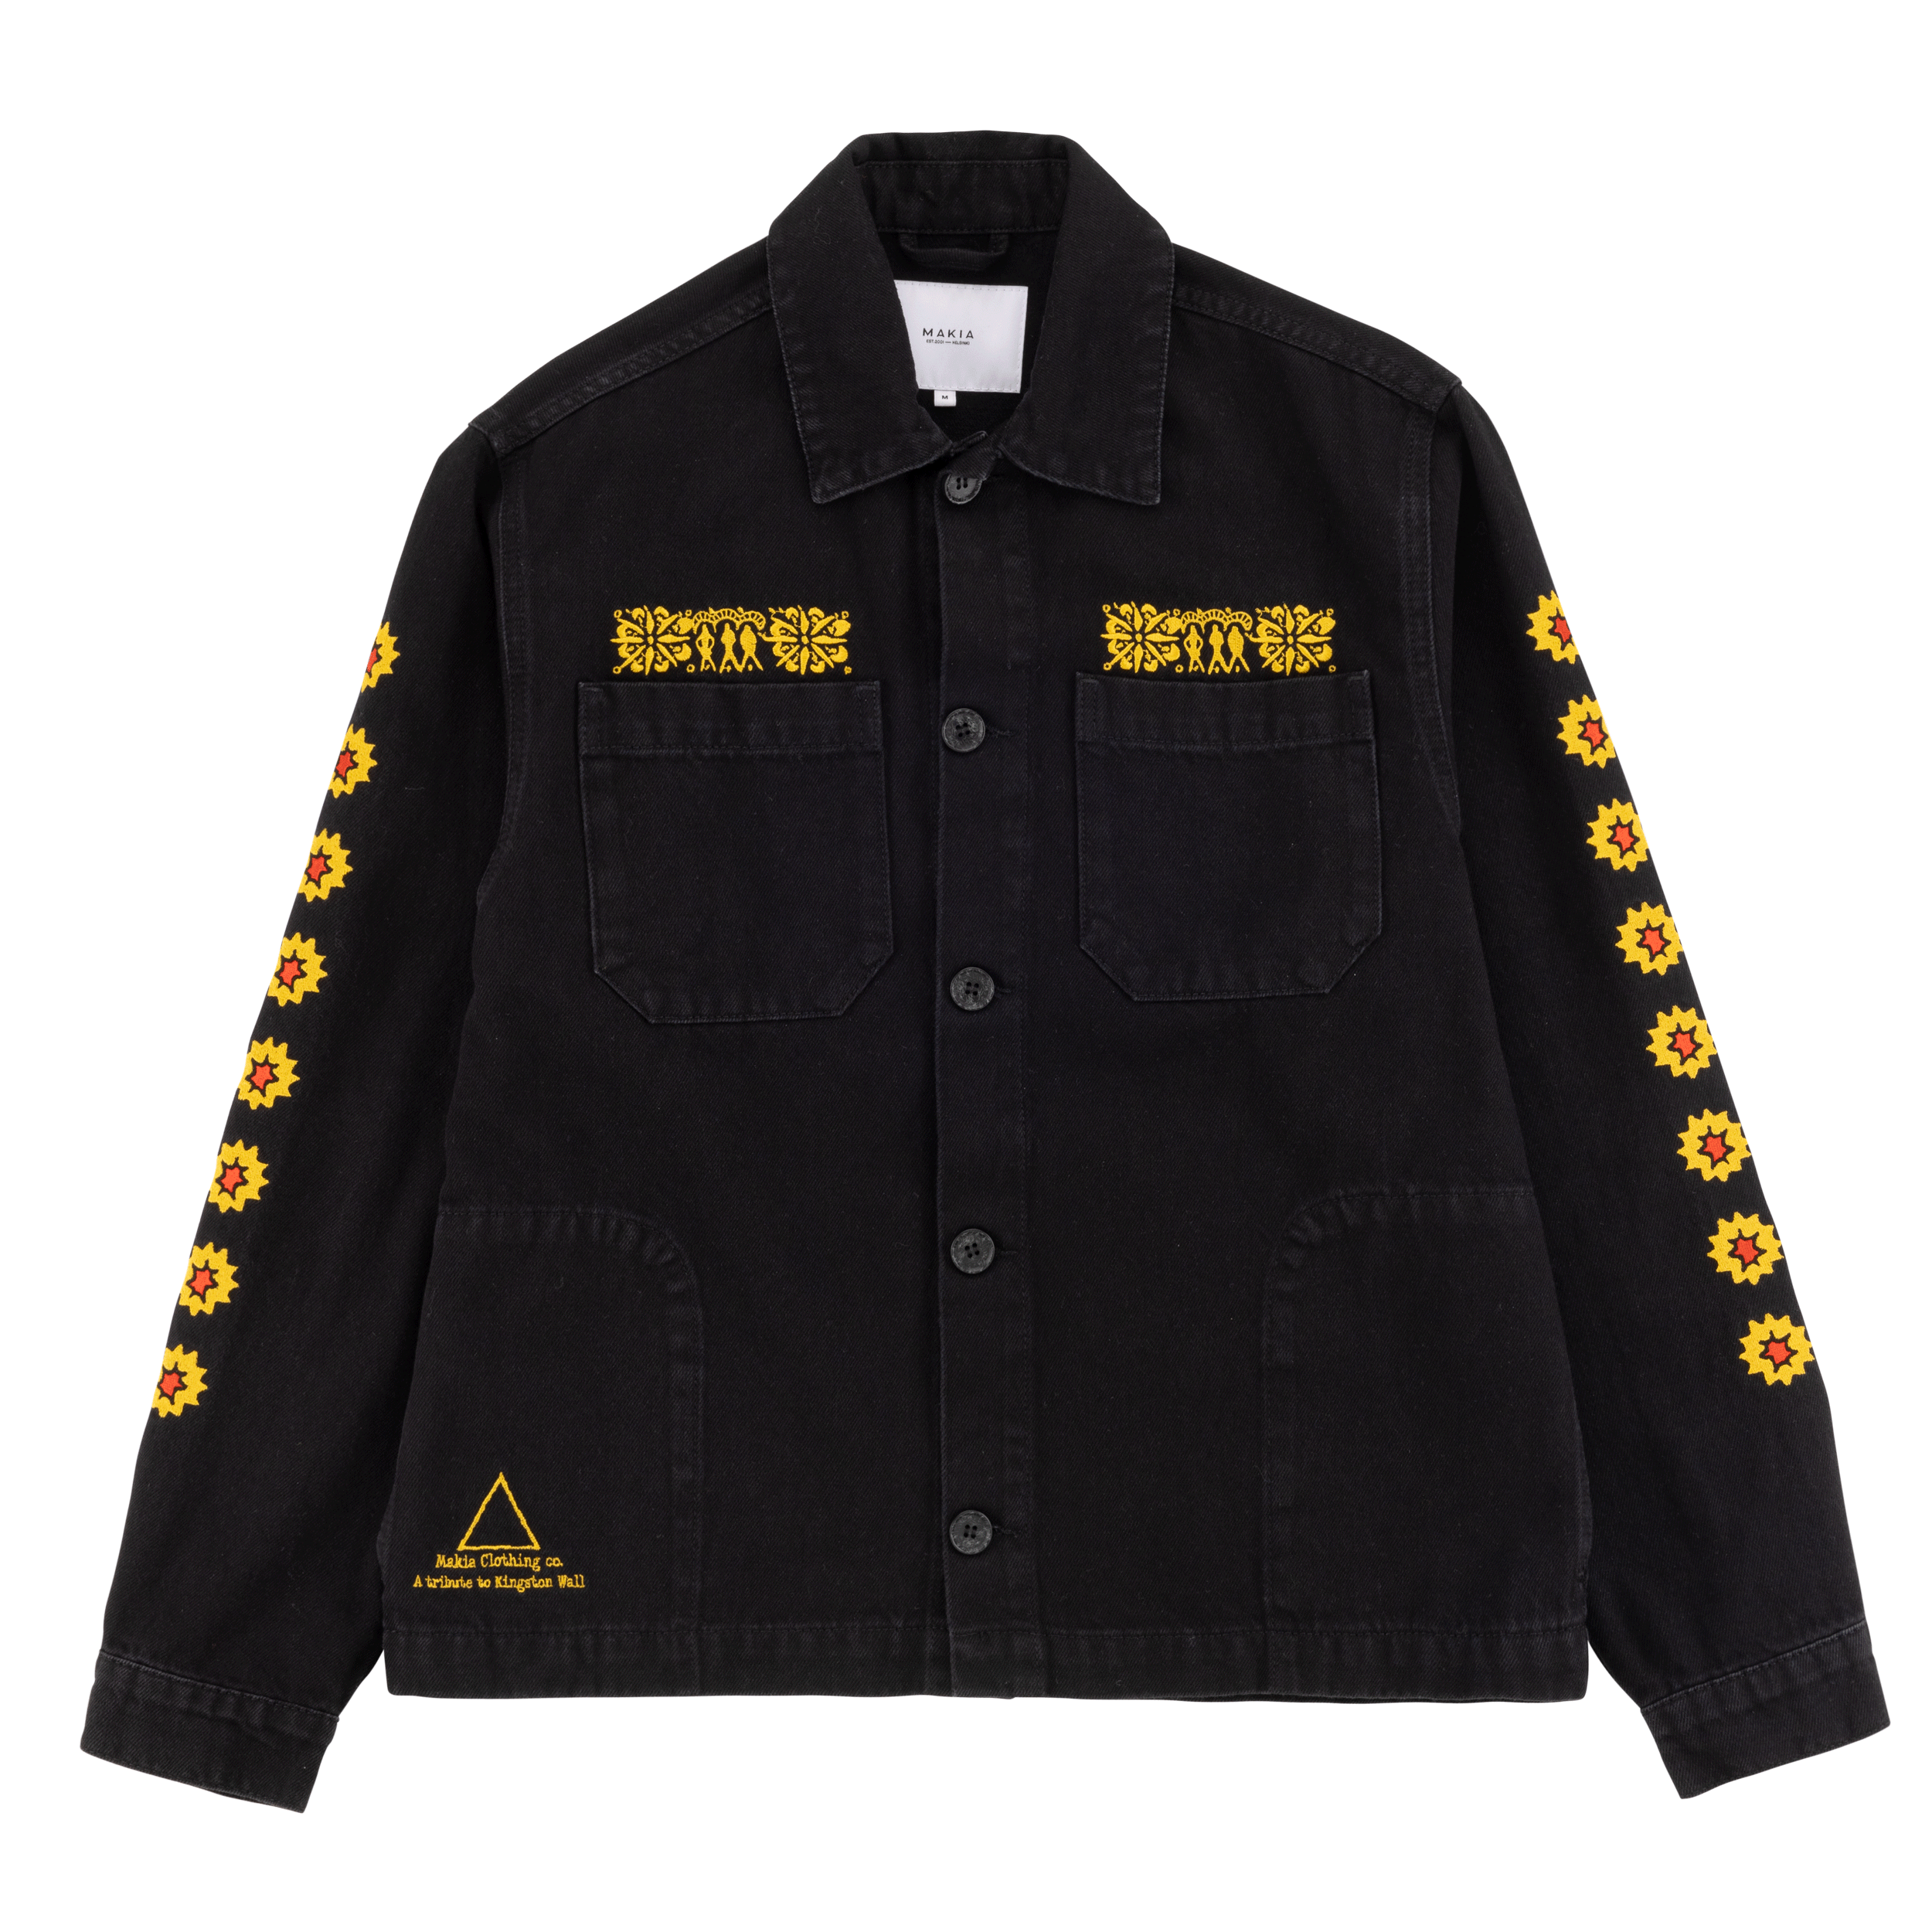 Witchdoctor Jacket